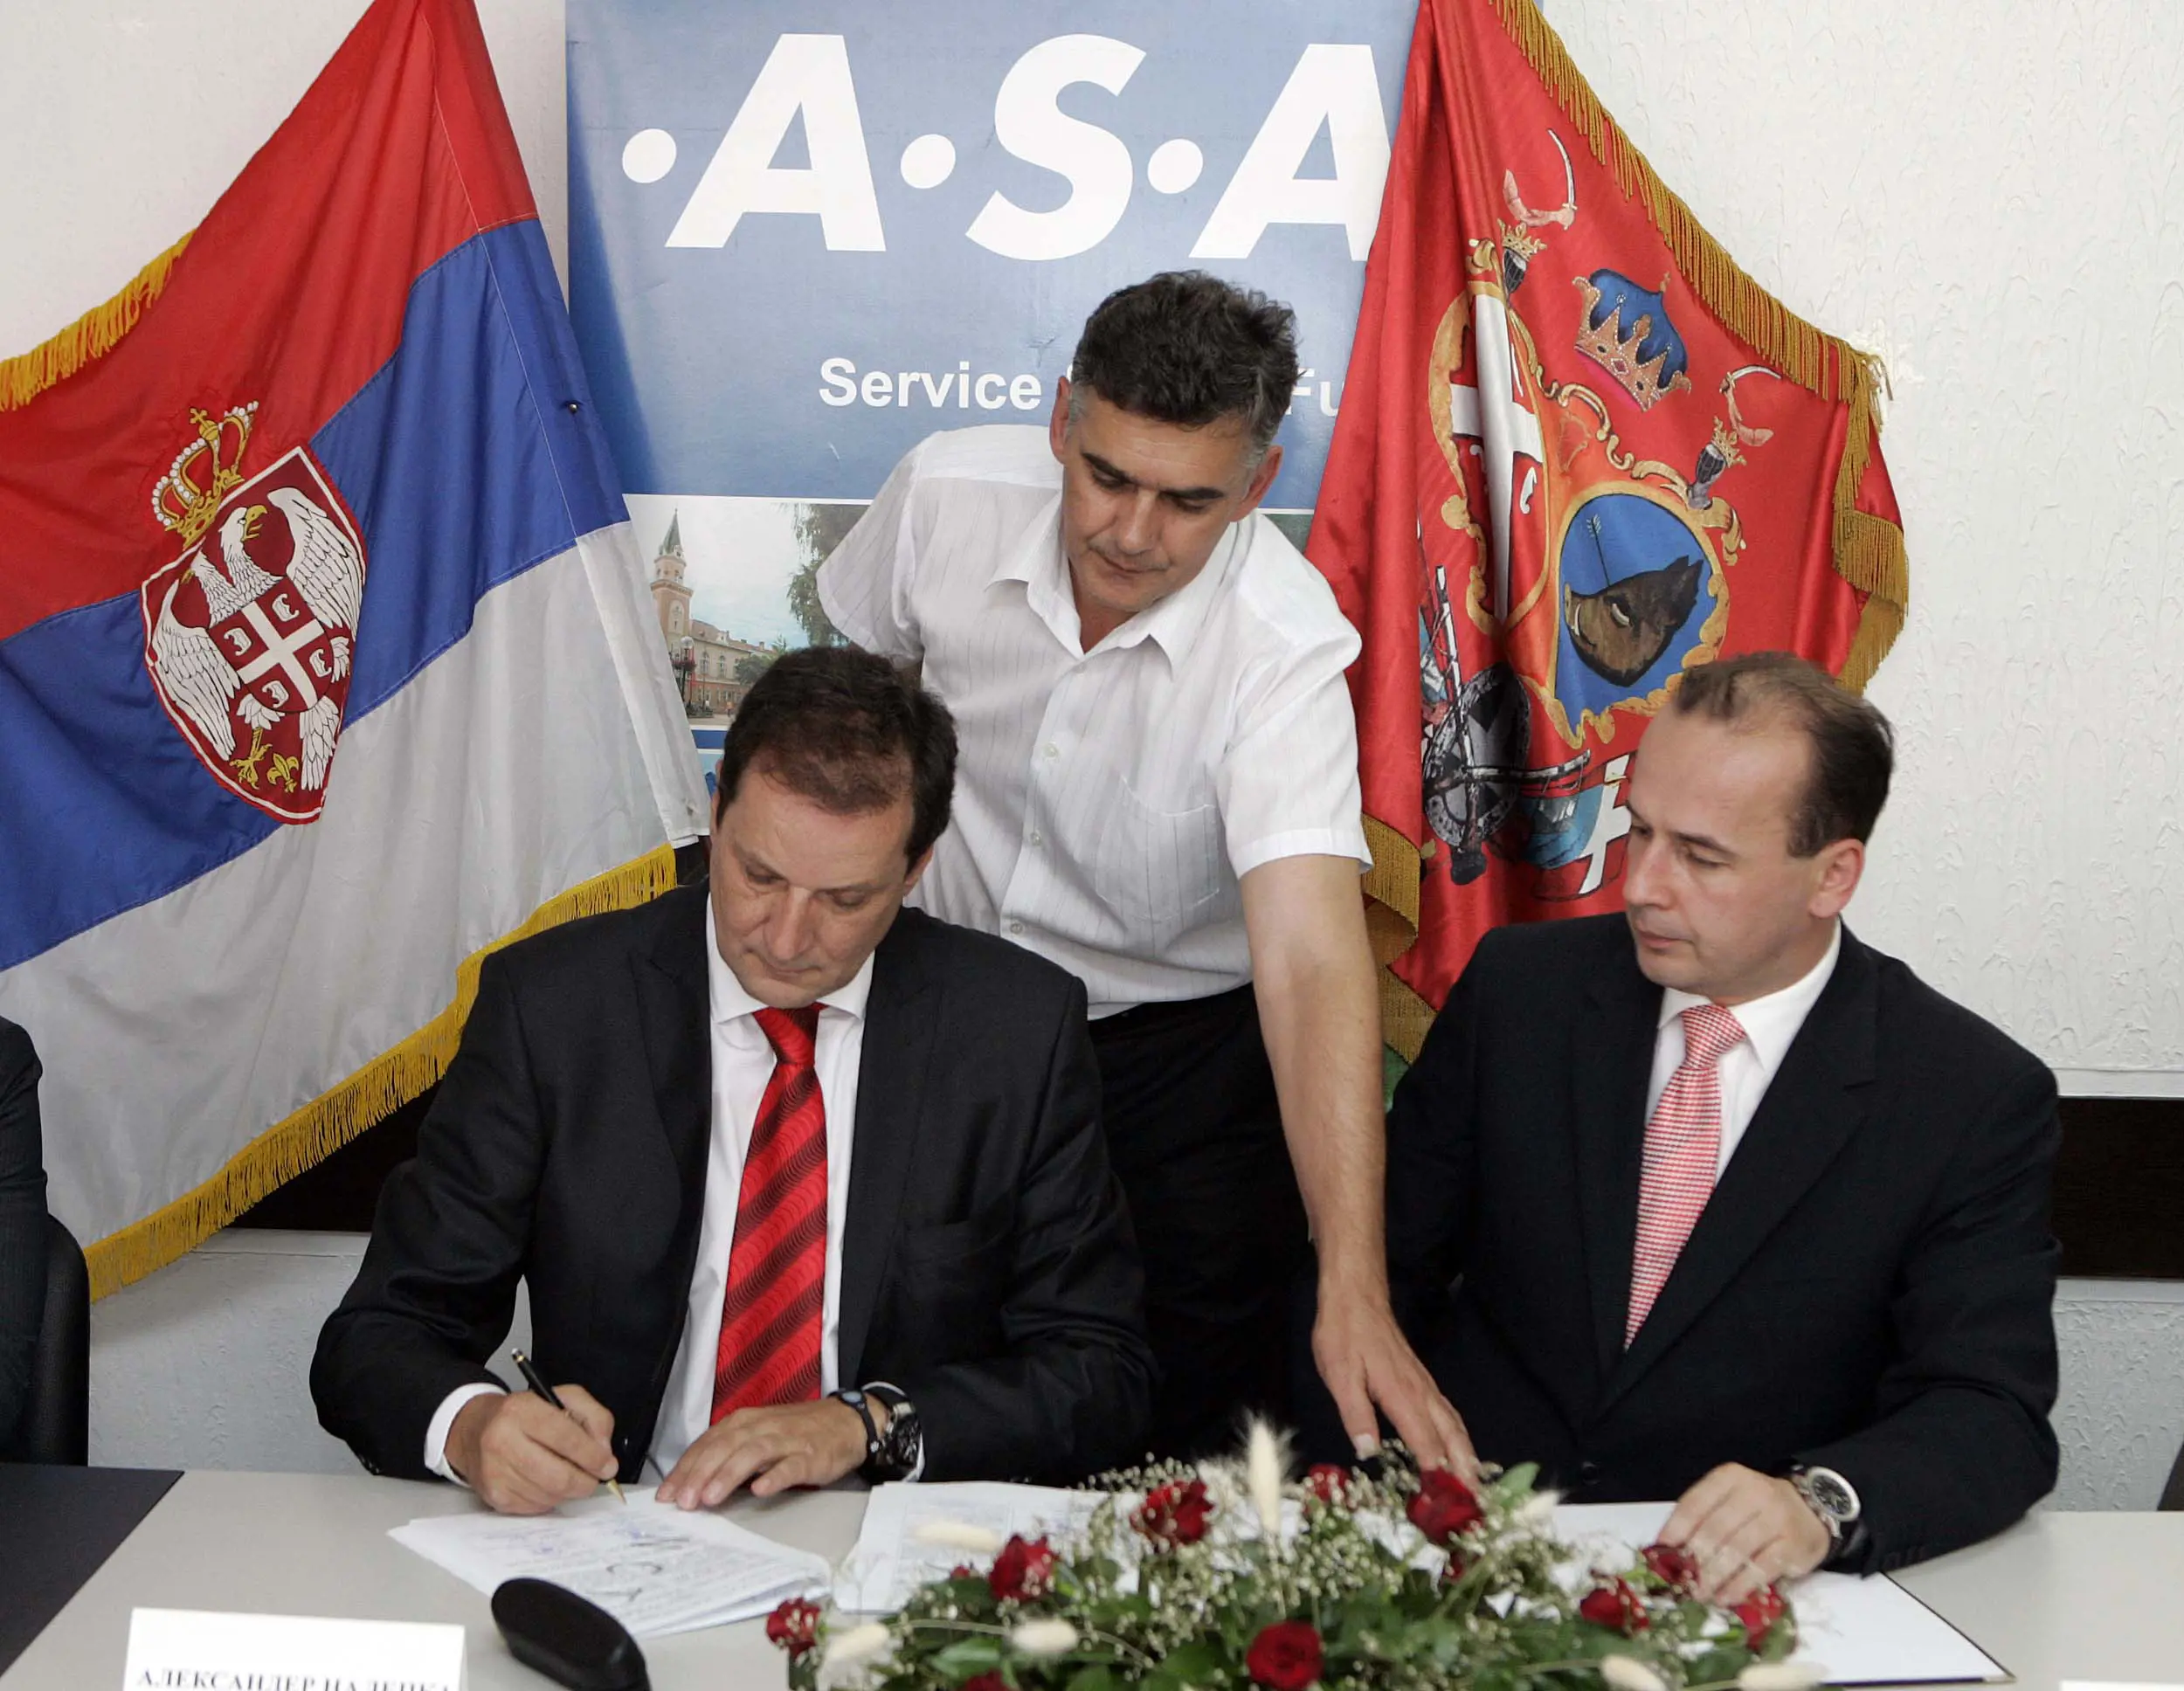 Municipality Topola and company .A.S.A. EKO have signed the agreement on disposal of municipal solid waste on the landfill “Vrbak” in Lapovo.  